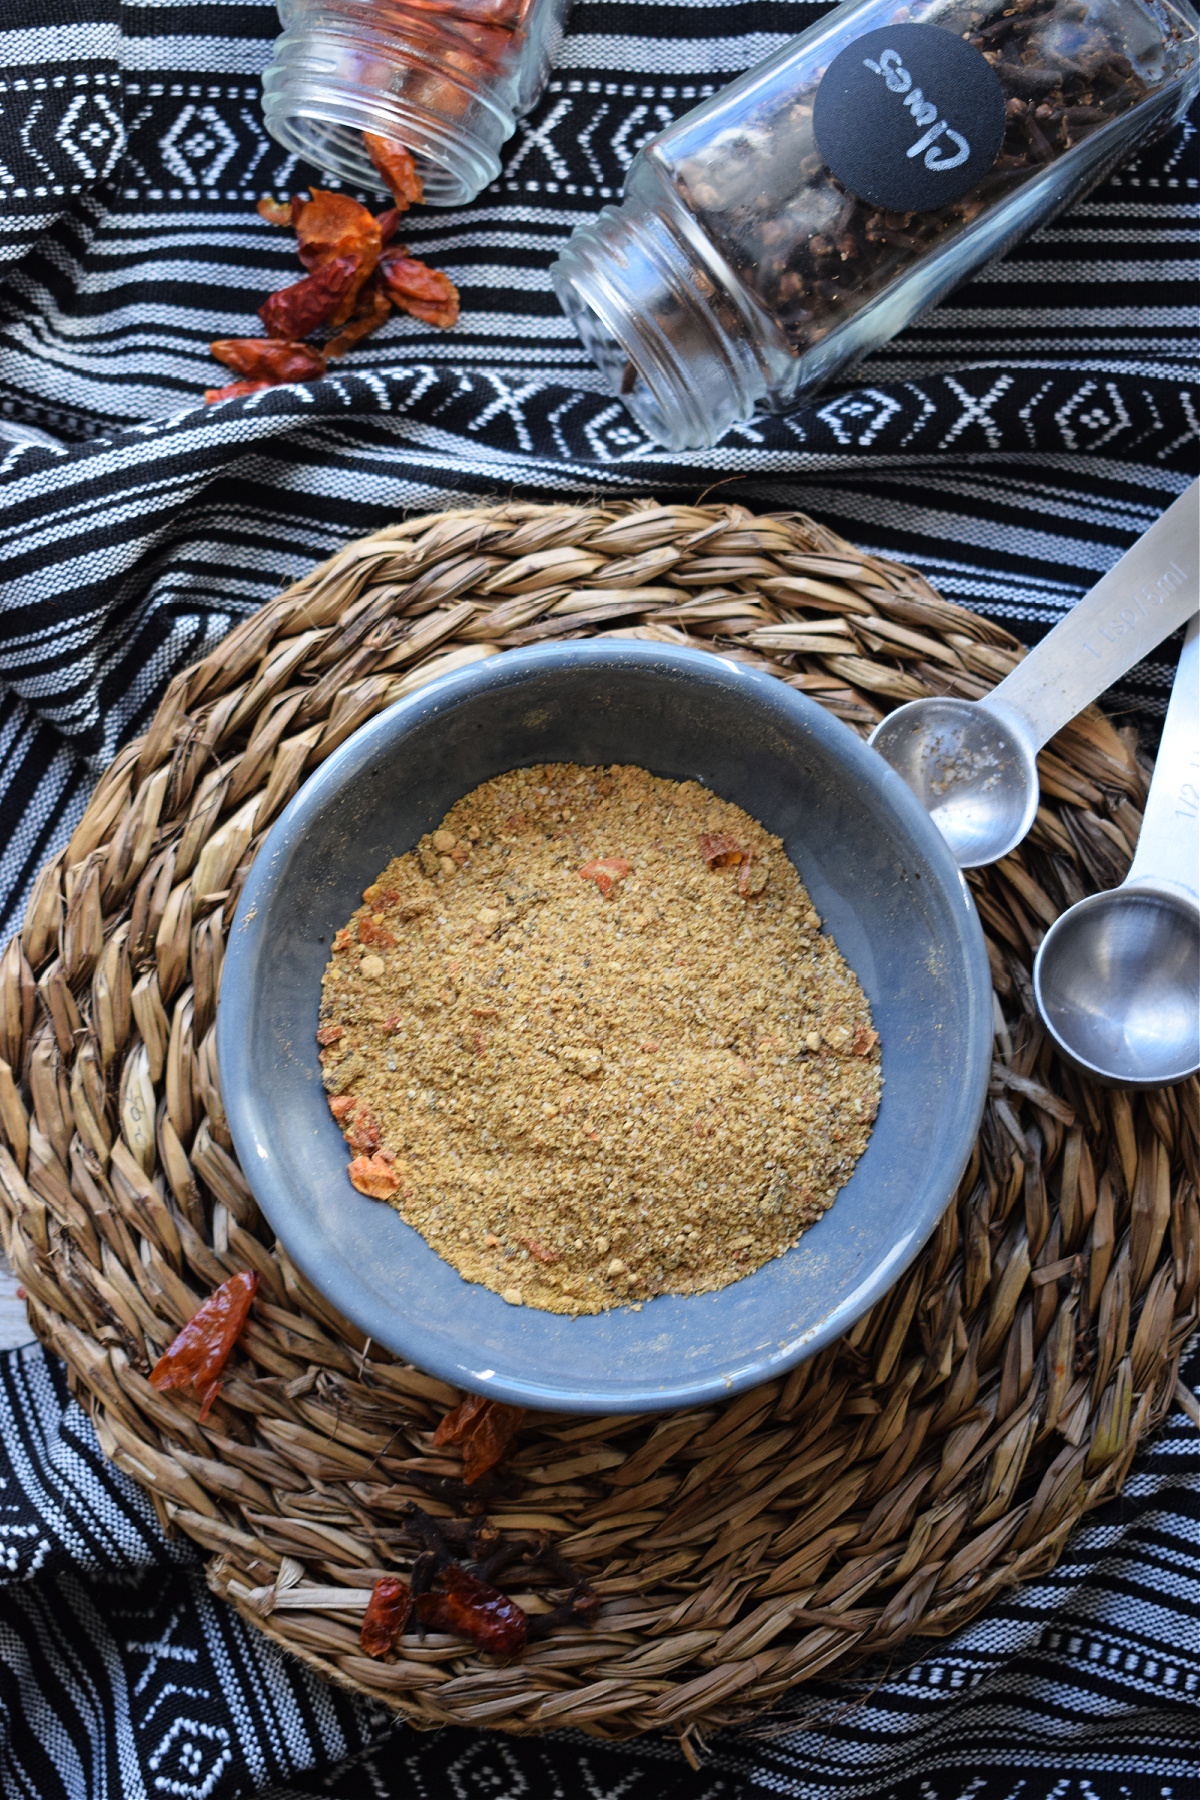 Moroccan seasoning in a bowl with other spices